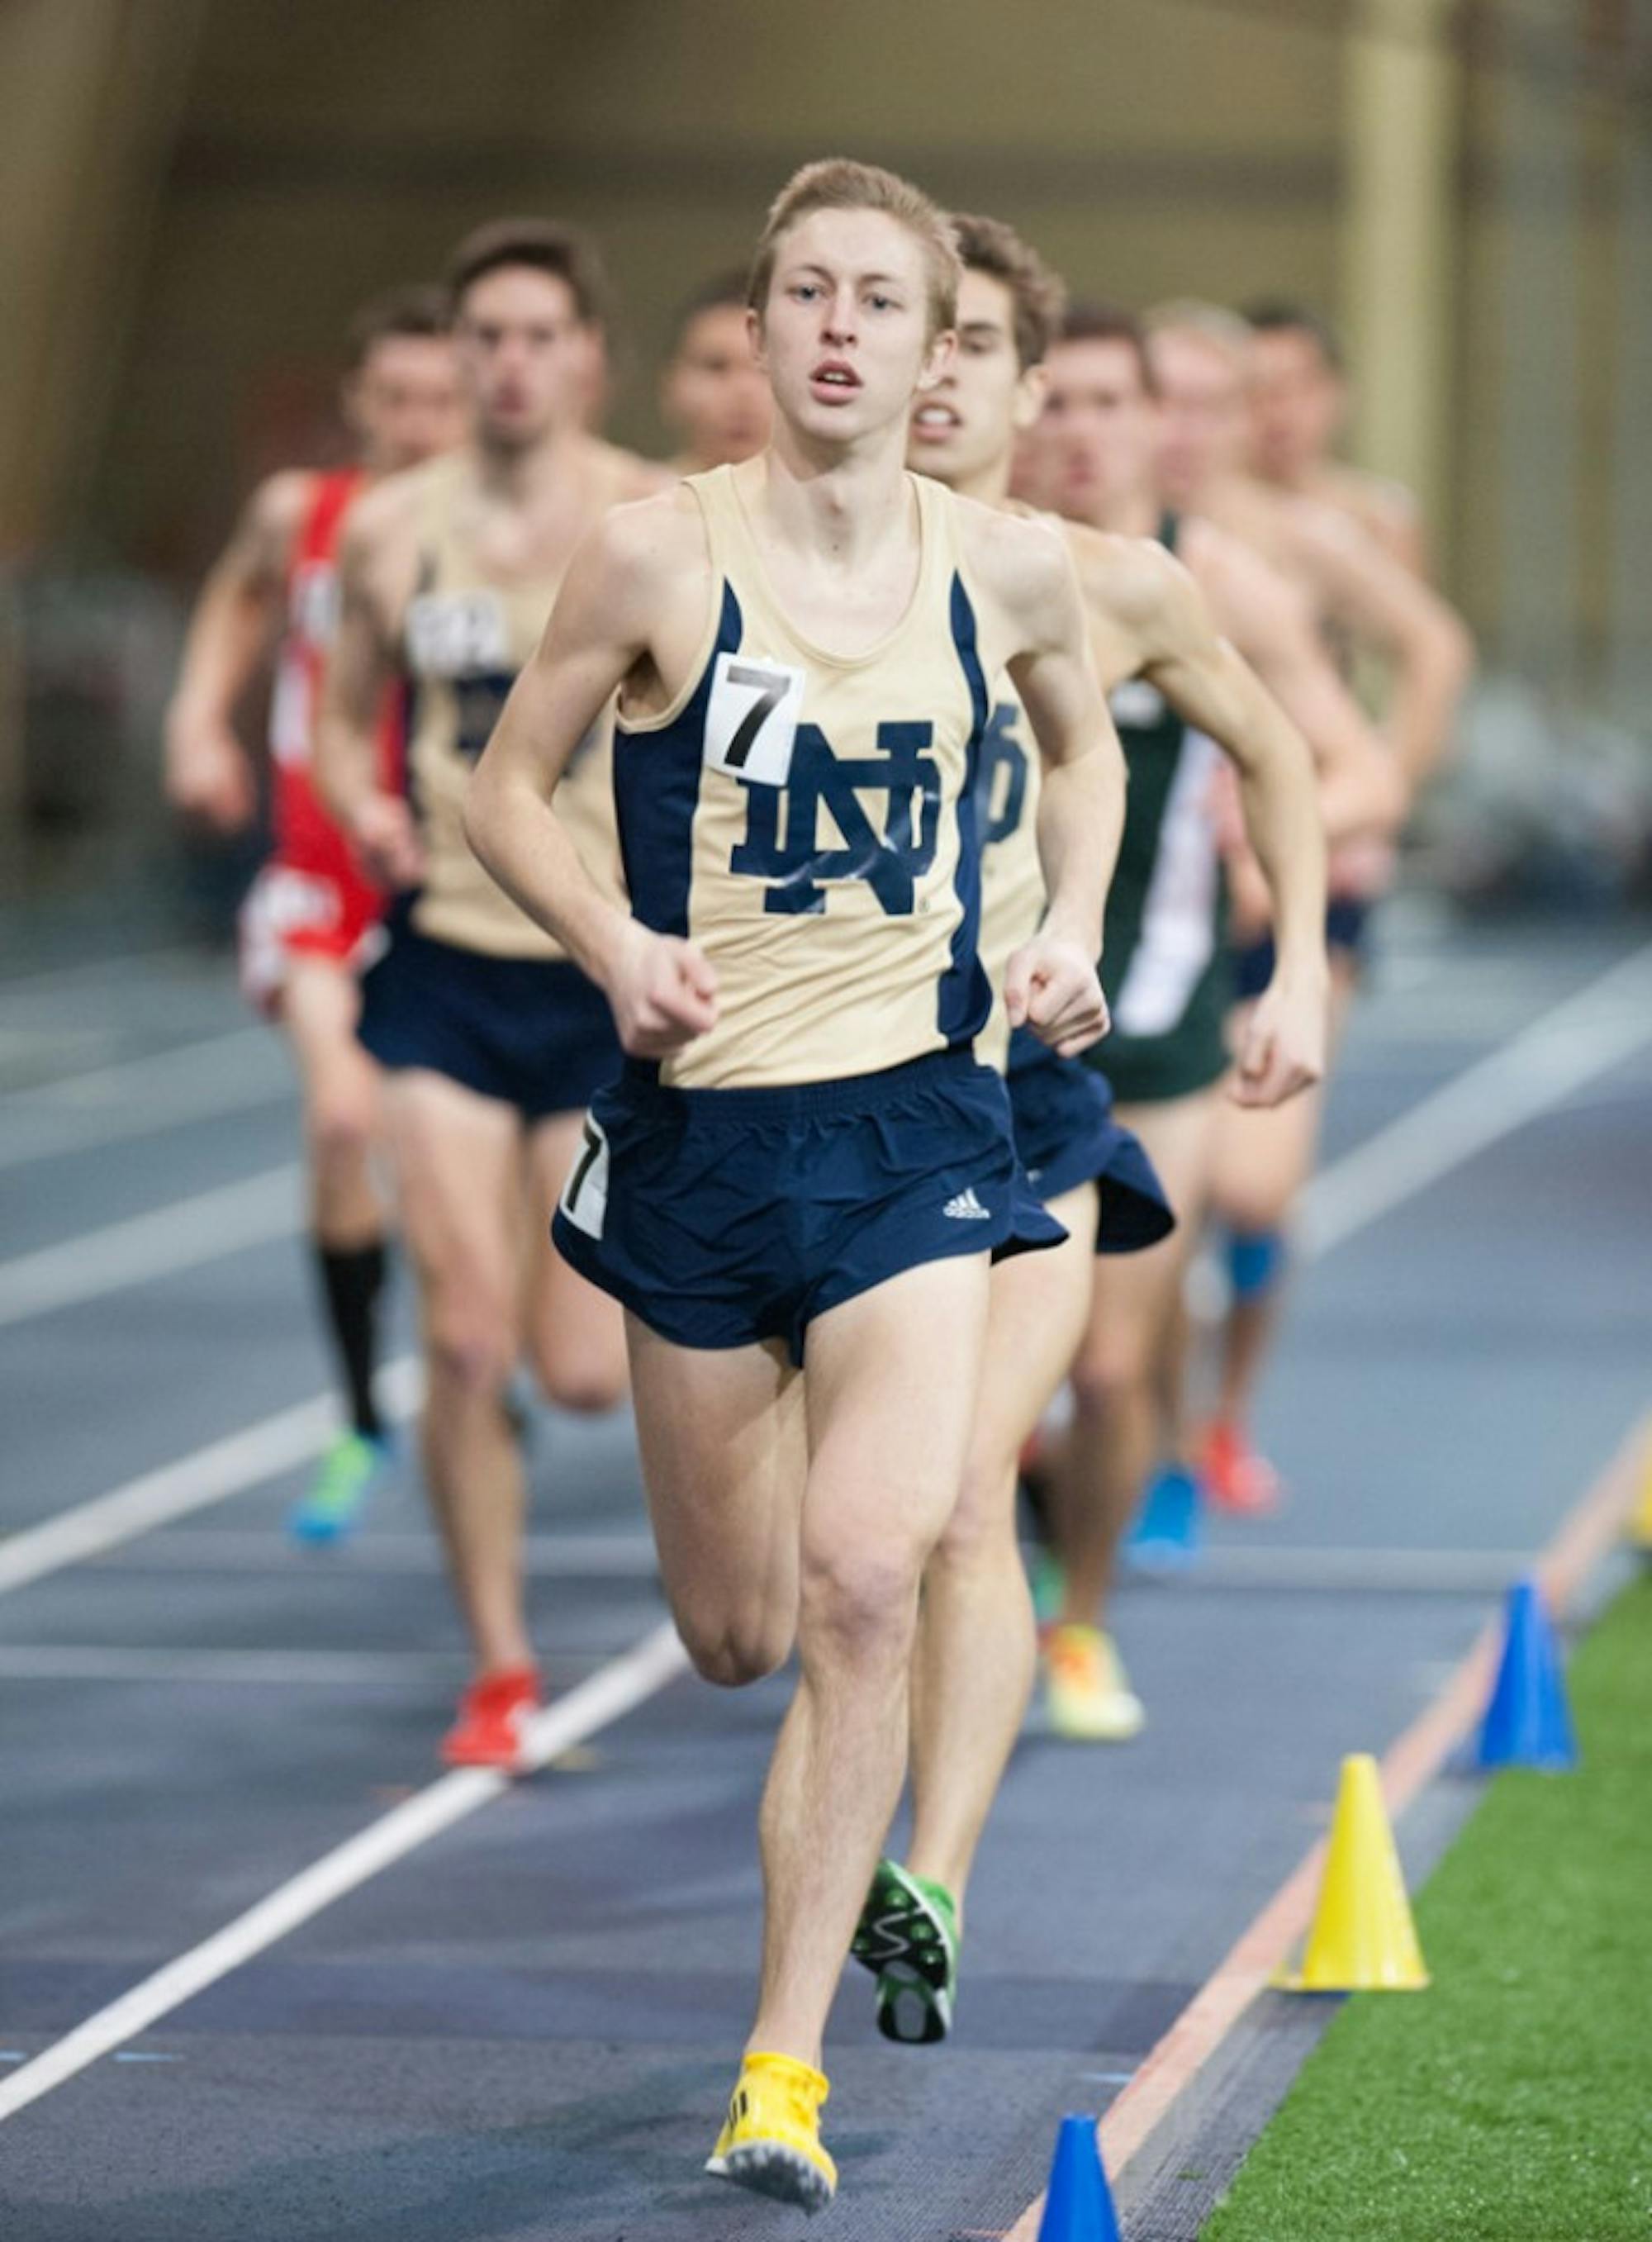 Graduate student Nick Happe runs in the Notre Dame Invitational on January 25, 2014 at Loftus Sports Center. Happe finished fourth in the 3,000-meter run at the Husky Classic on Saturday in Seattle, Wa.